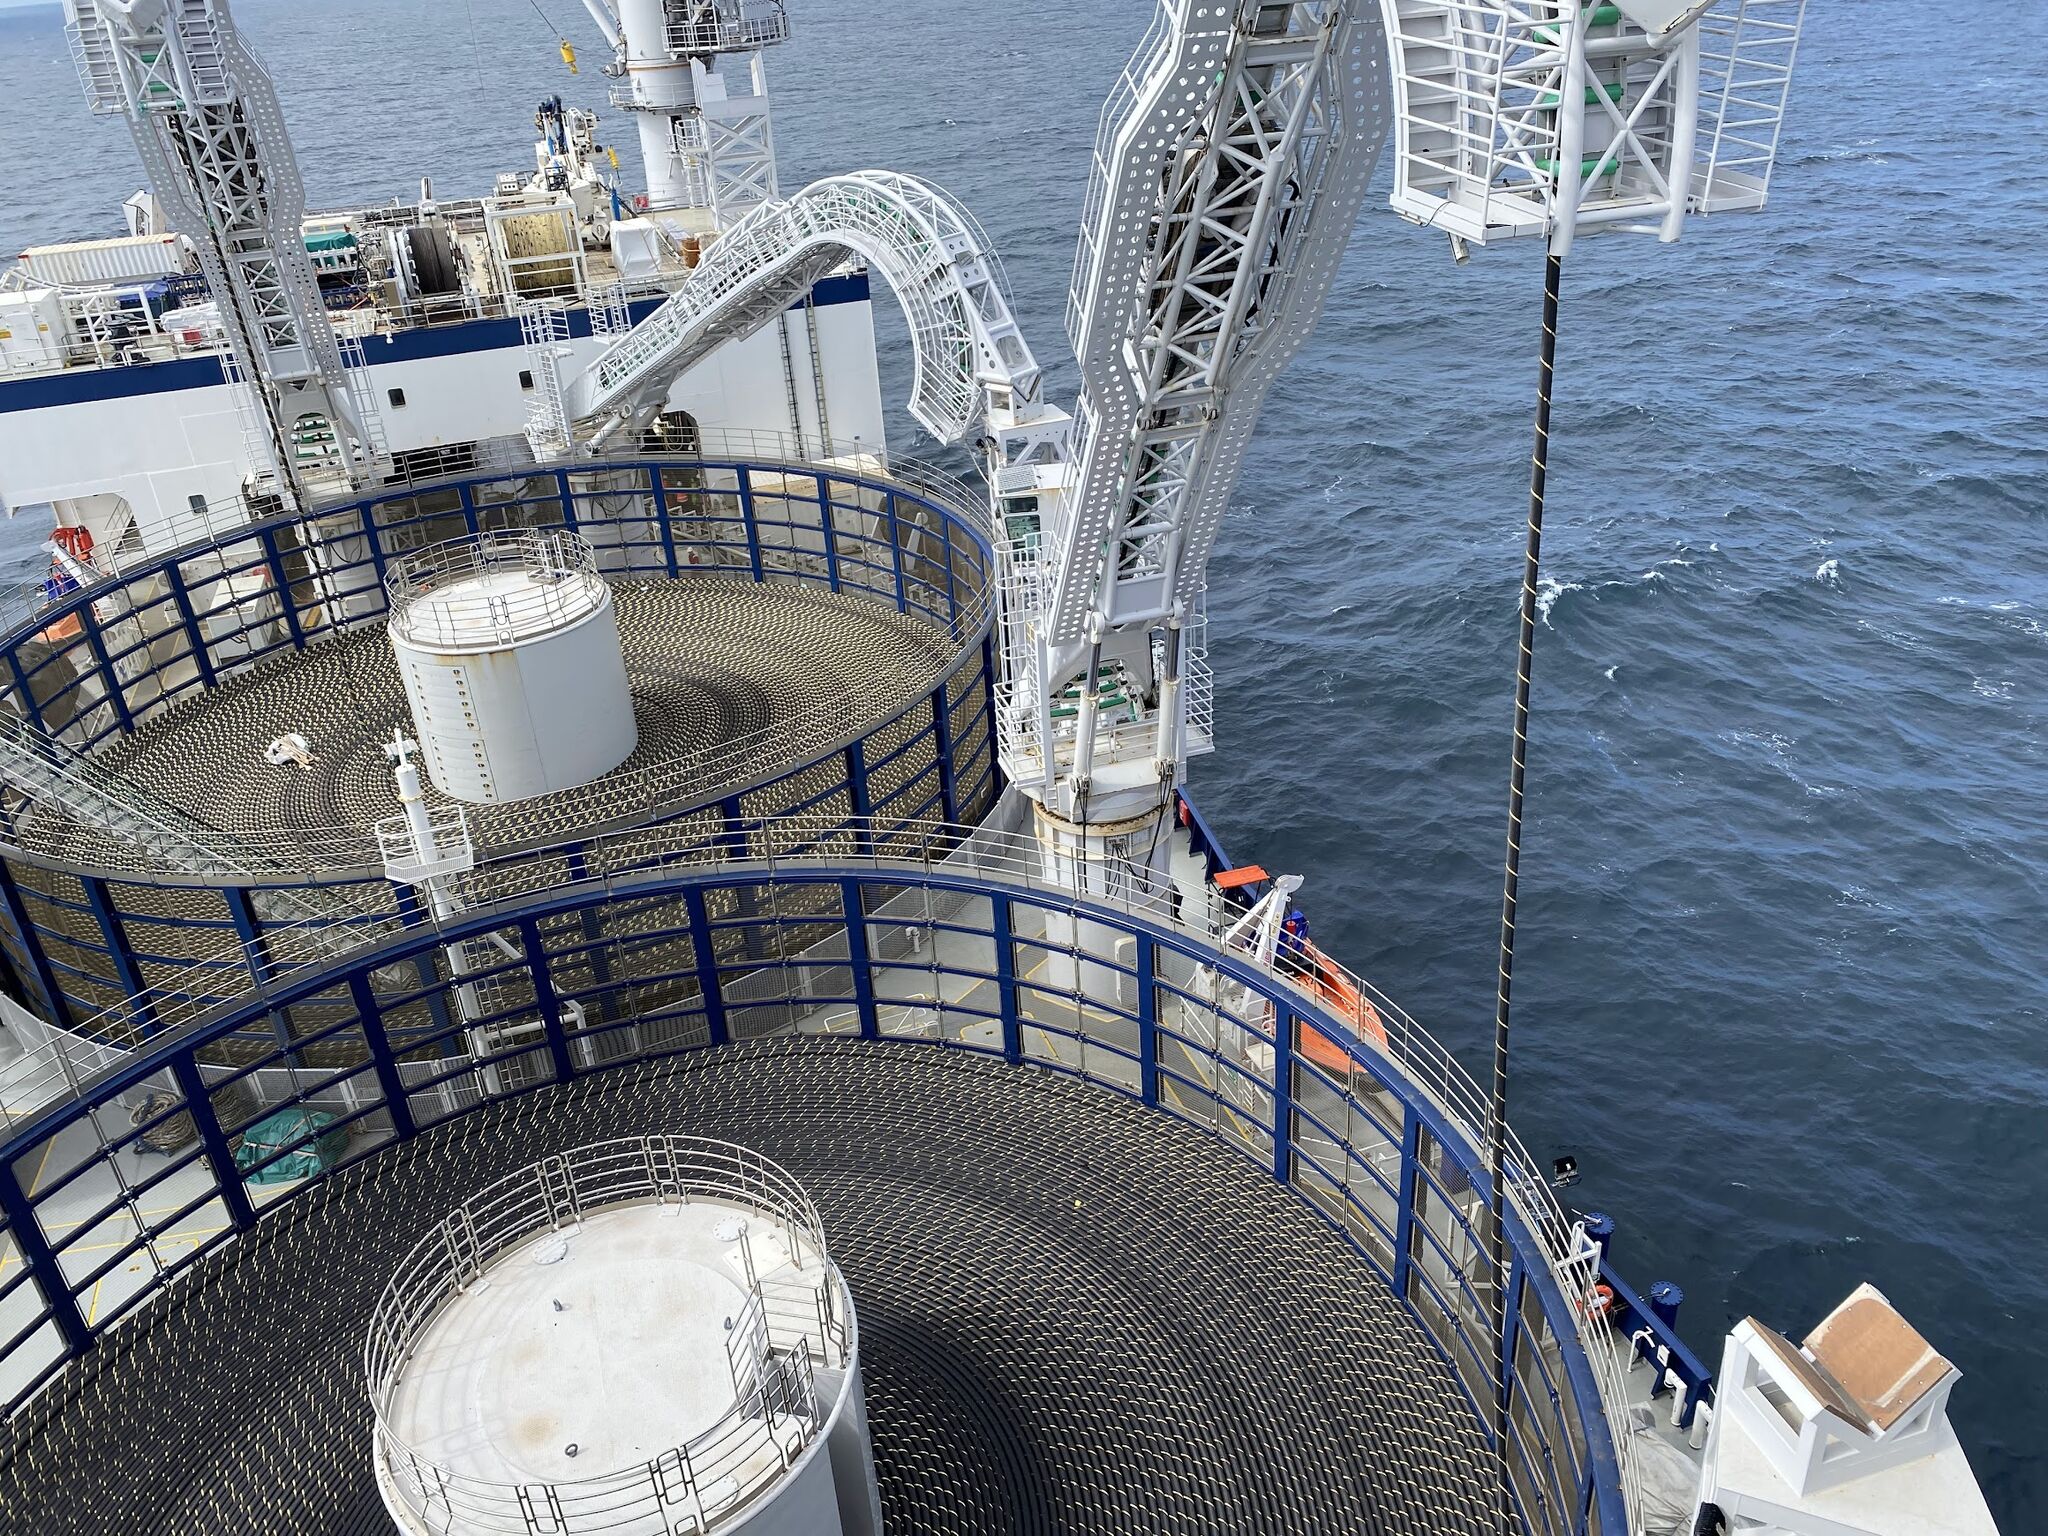 UK and Denmark electrically connected as Prysmian installs Viking Link subsea cable